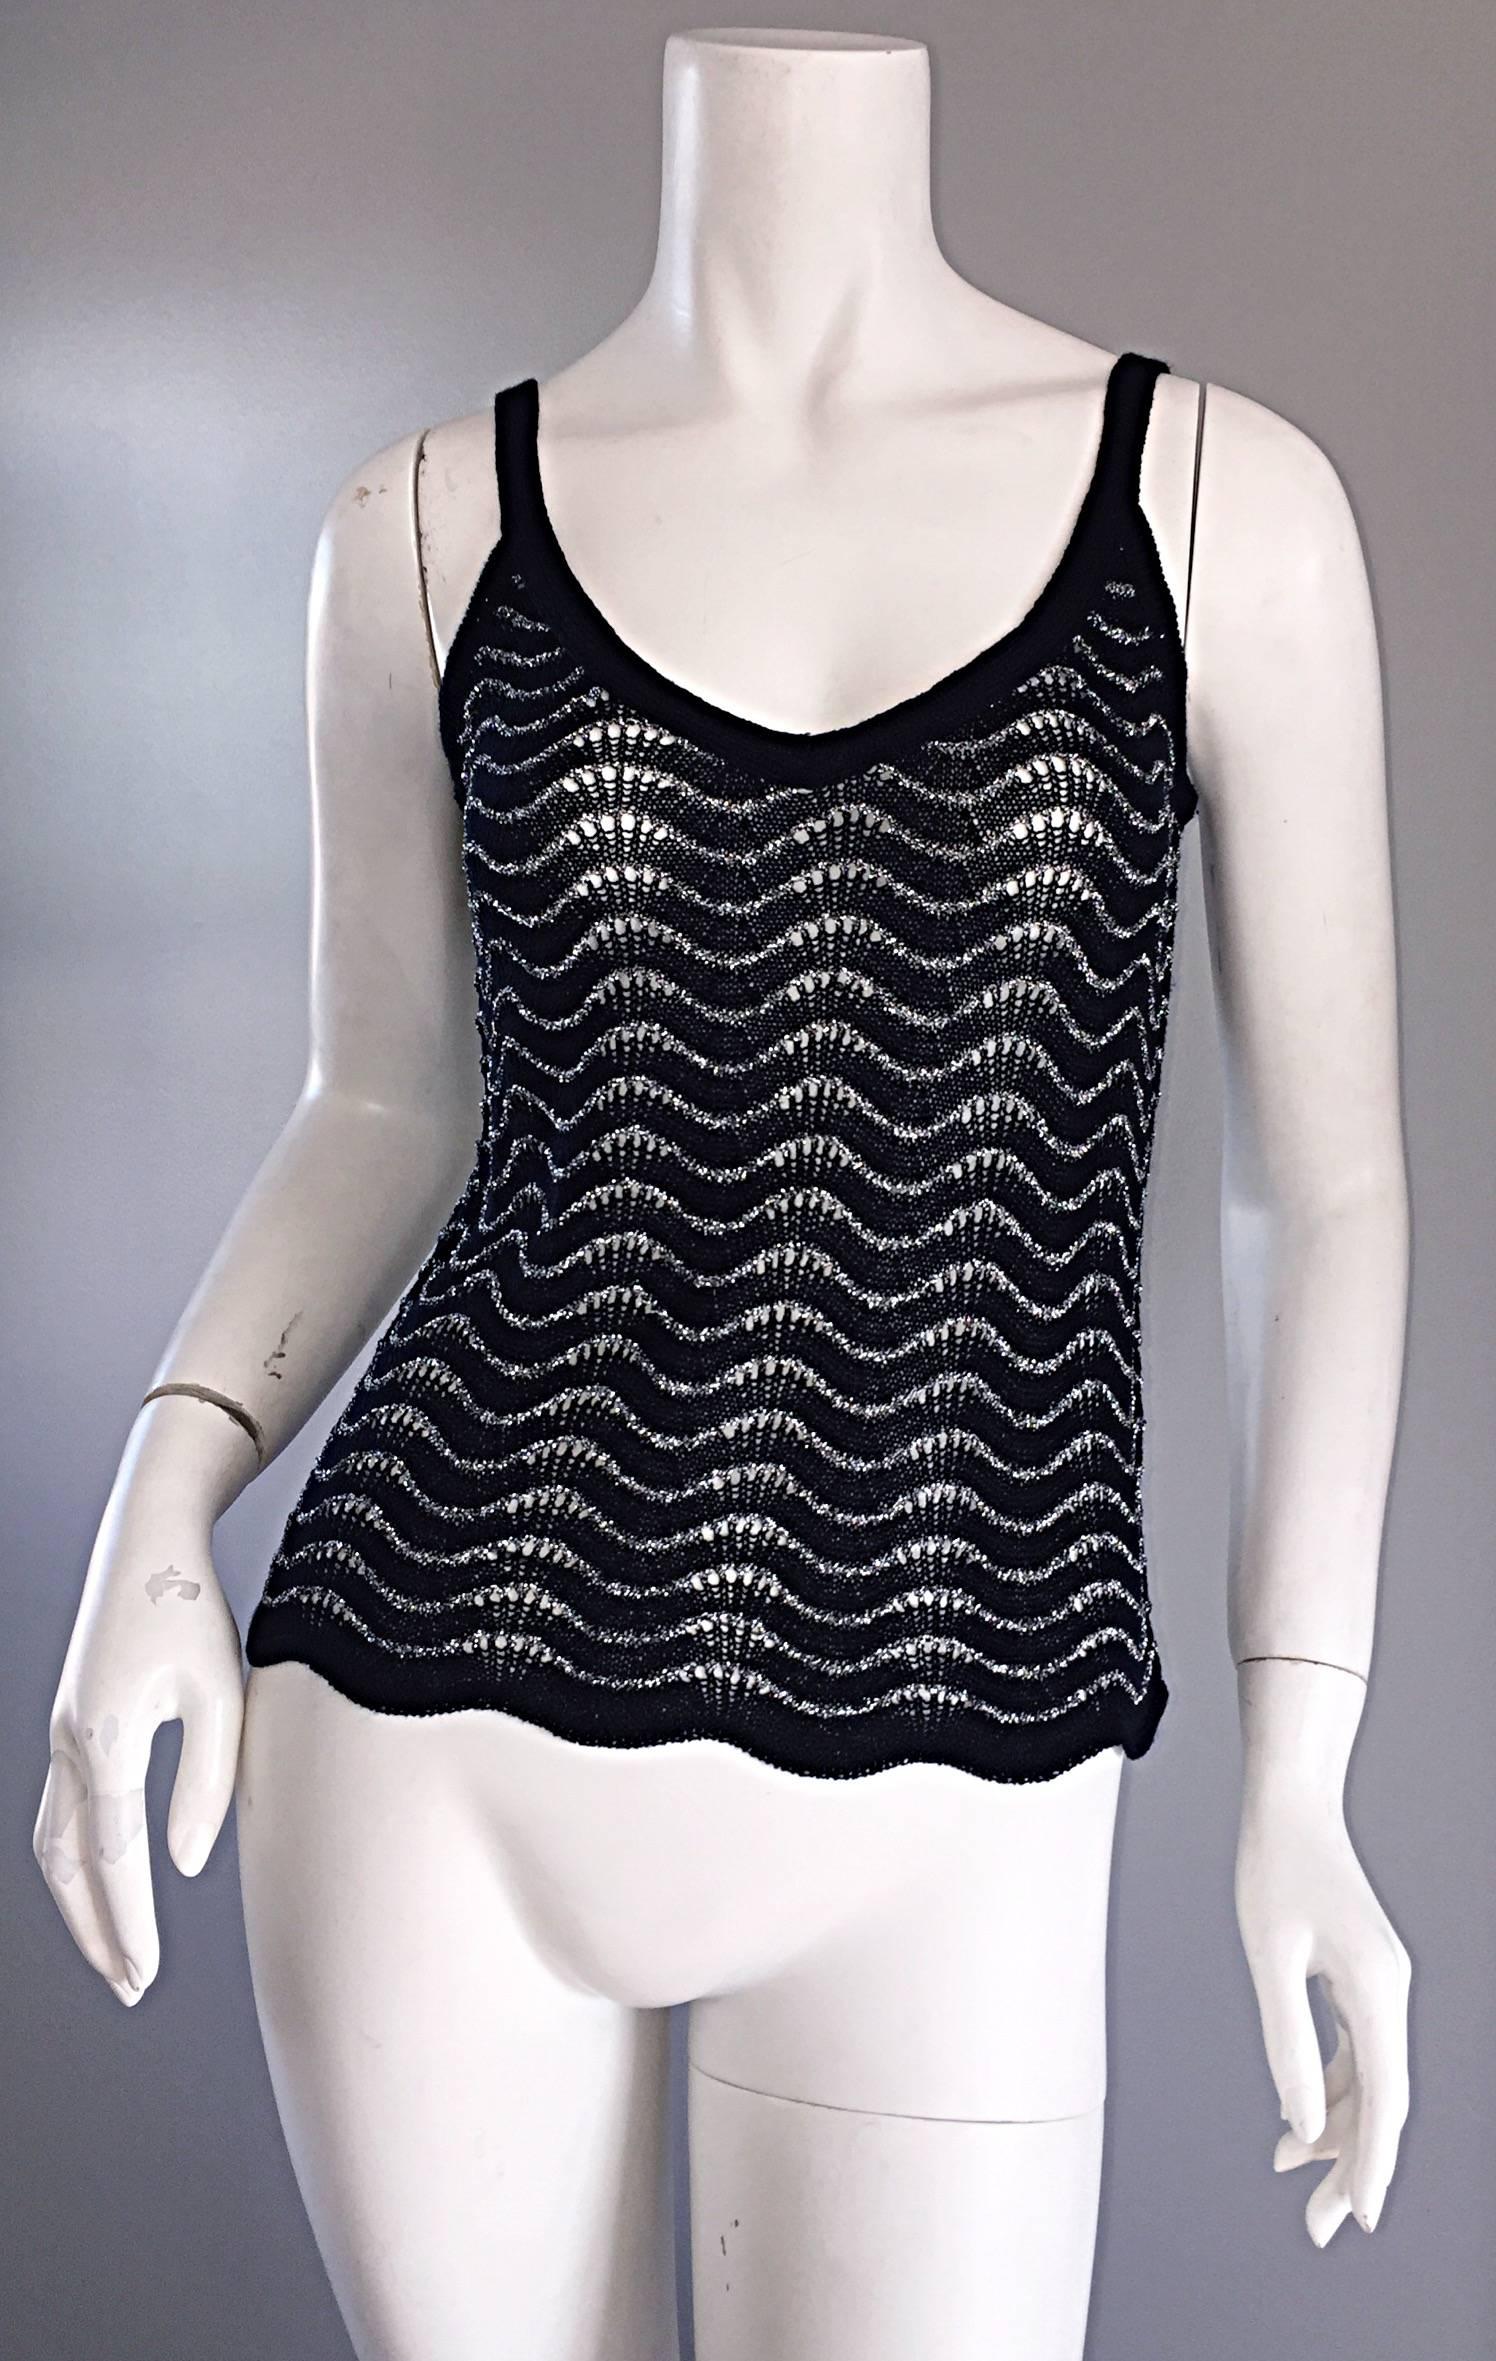 Beautiful vintage DIANE VON FURSTENBERG black and silver metallic wrap cardigan AND camisole set! Amazing black and silver metallic crochet throughout both pieces. Cardigan is wrap style, and features an interior waist button, and outer waist